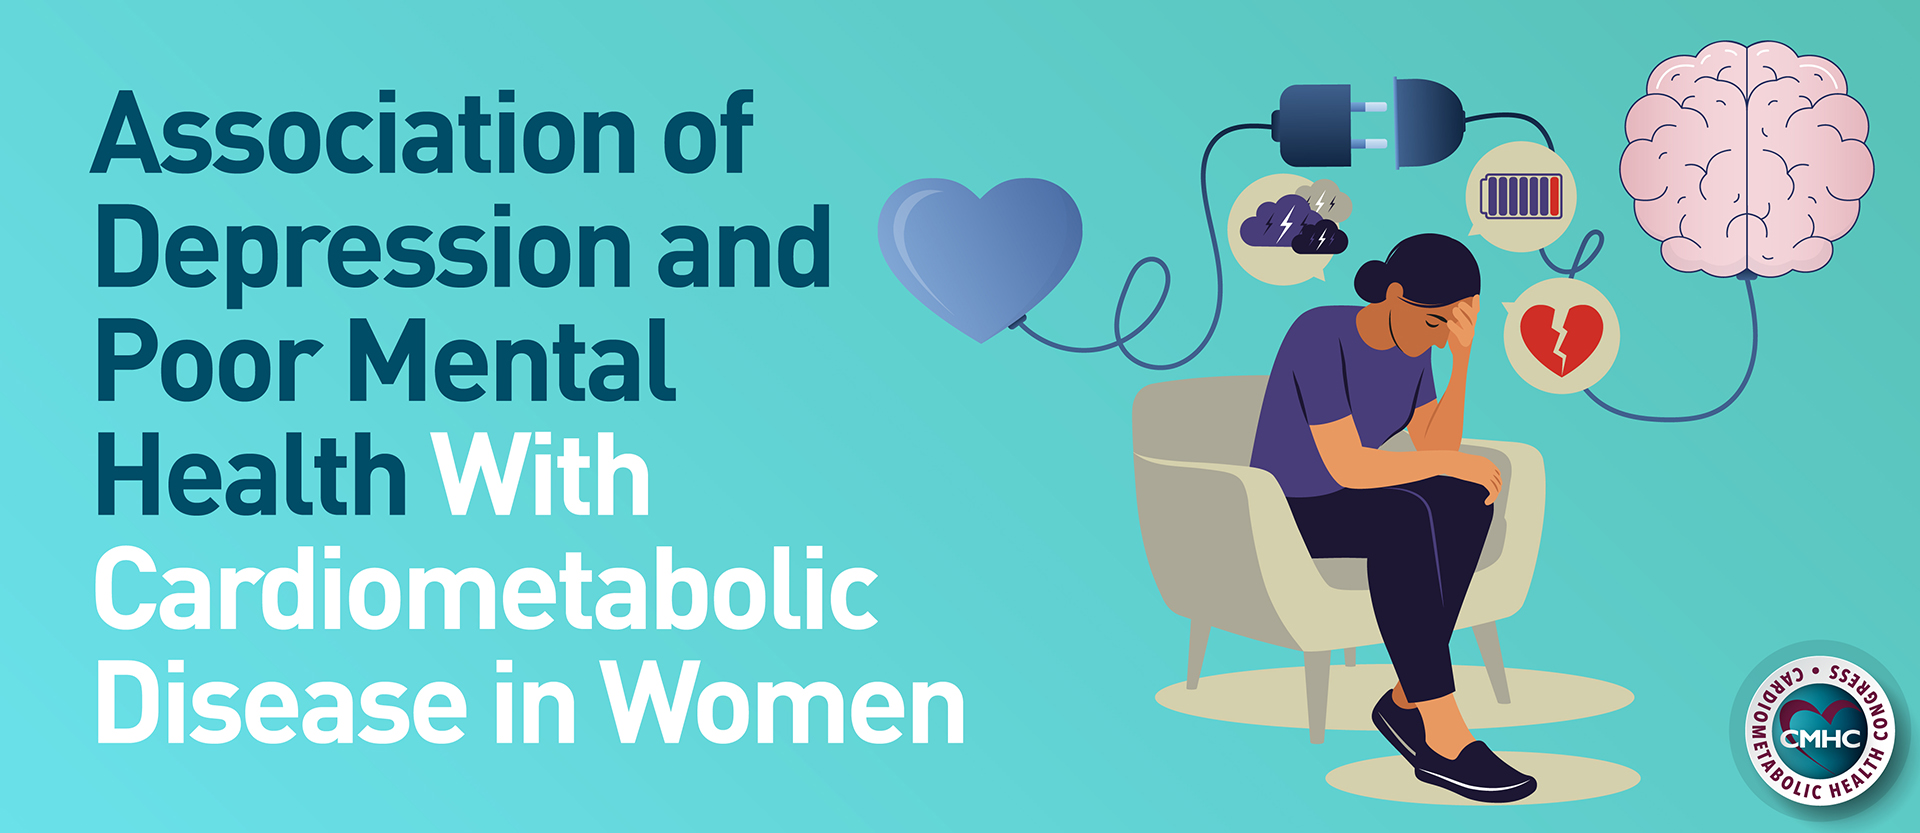 Association of Depression and Poor Mental Health With Cardiometabolic Disease in Women